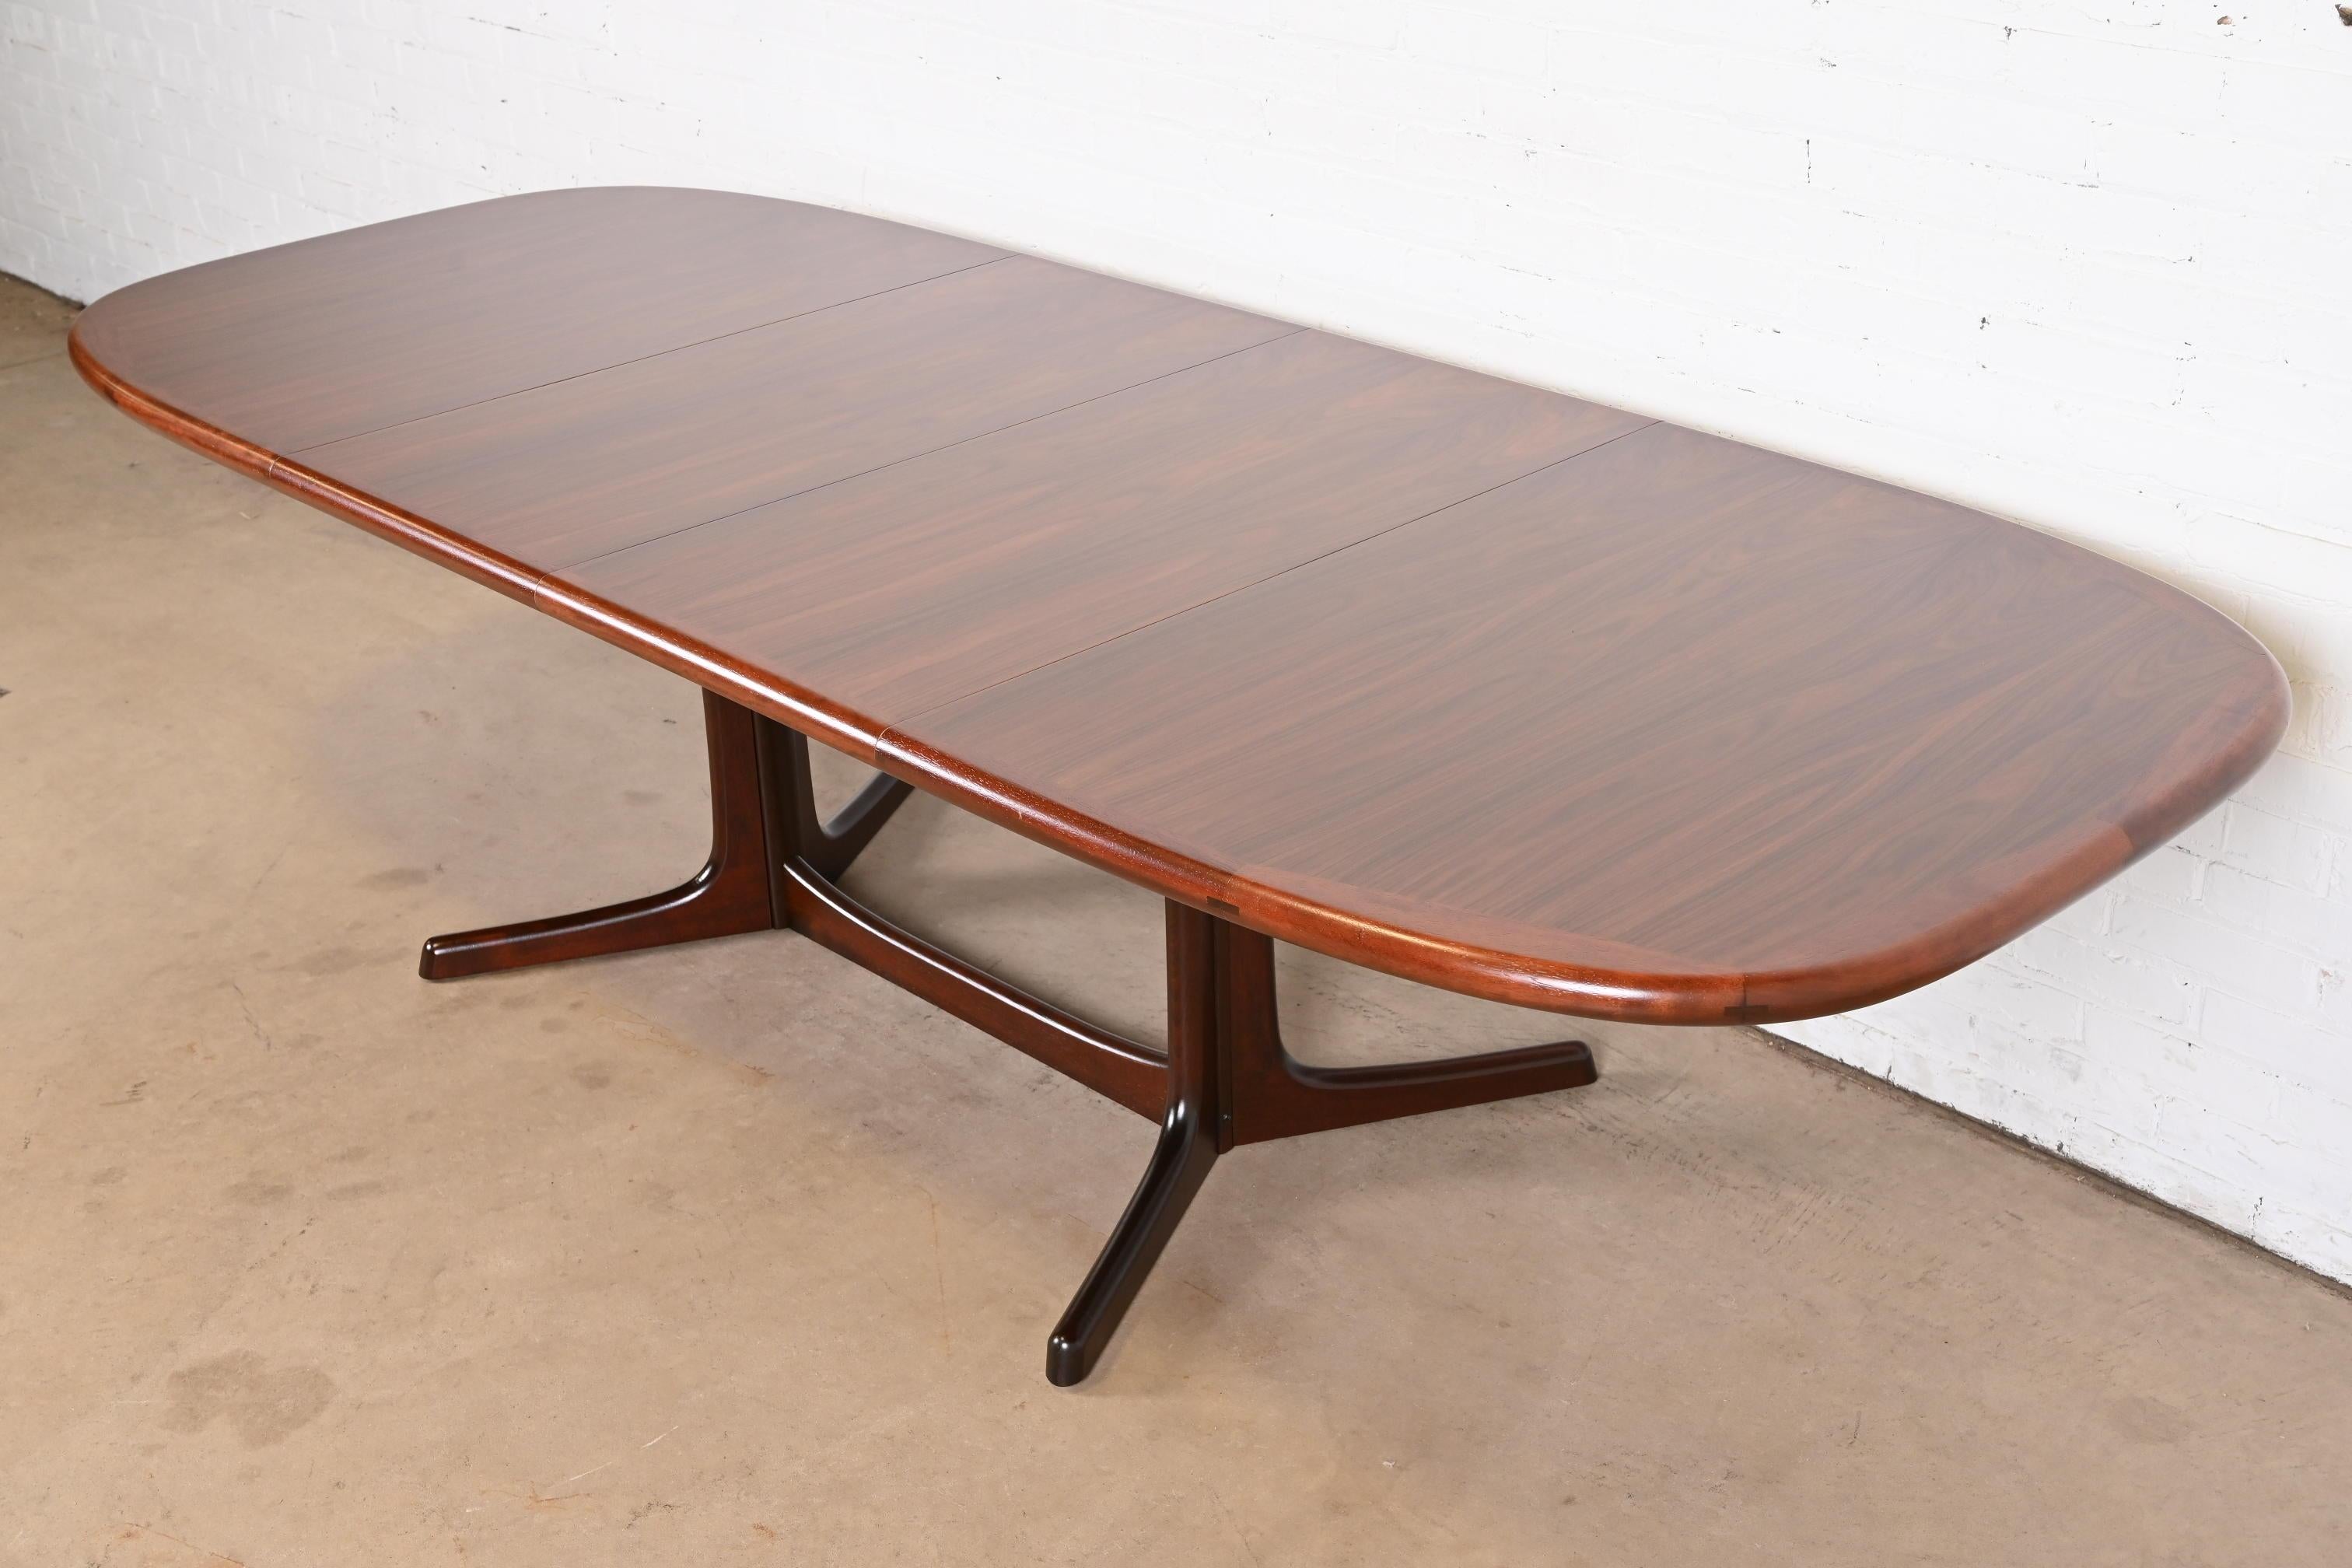 Scandinavian Modern Dyrlund Danish Modern Rosewood Pedestal Extension Dining Table, Newly Refinished For Sale